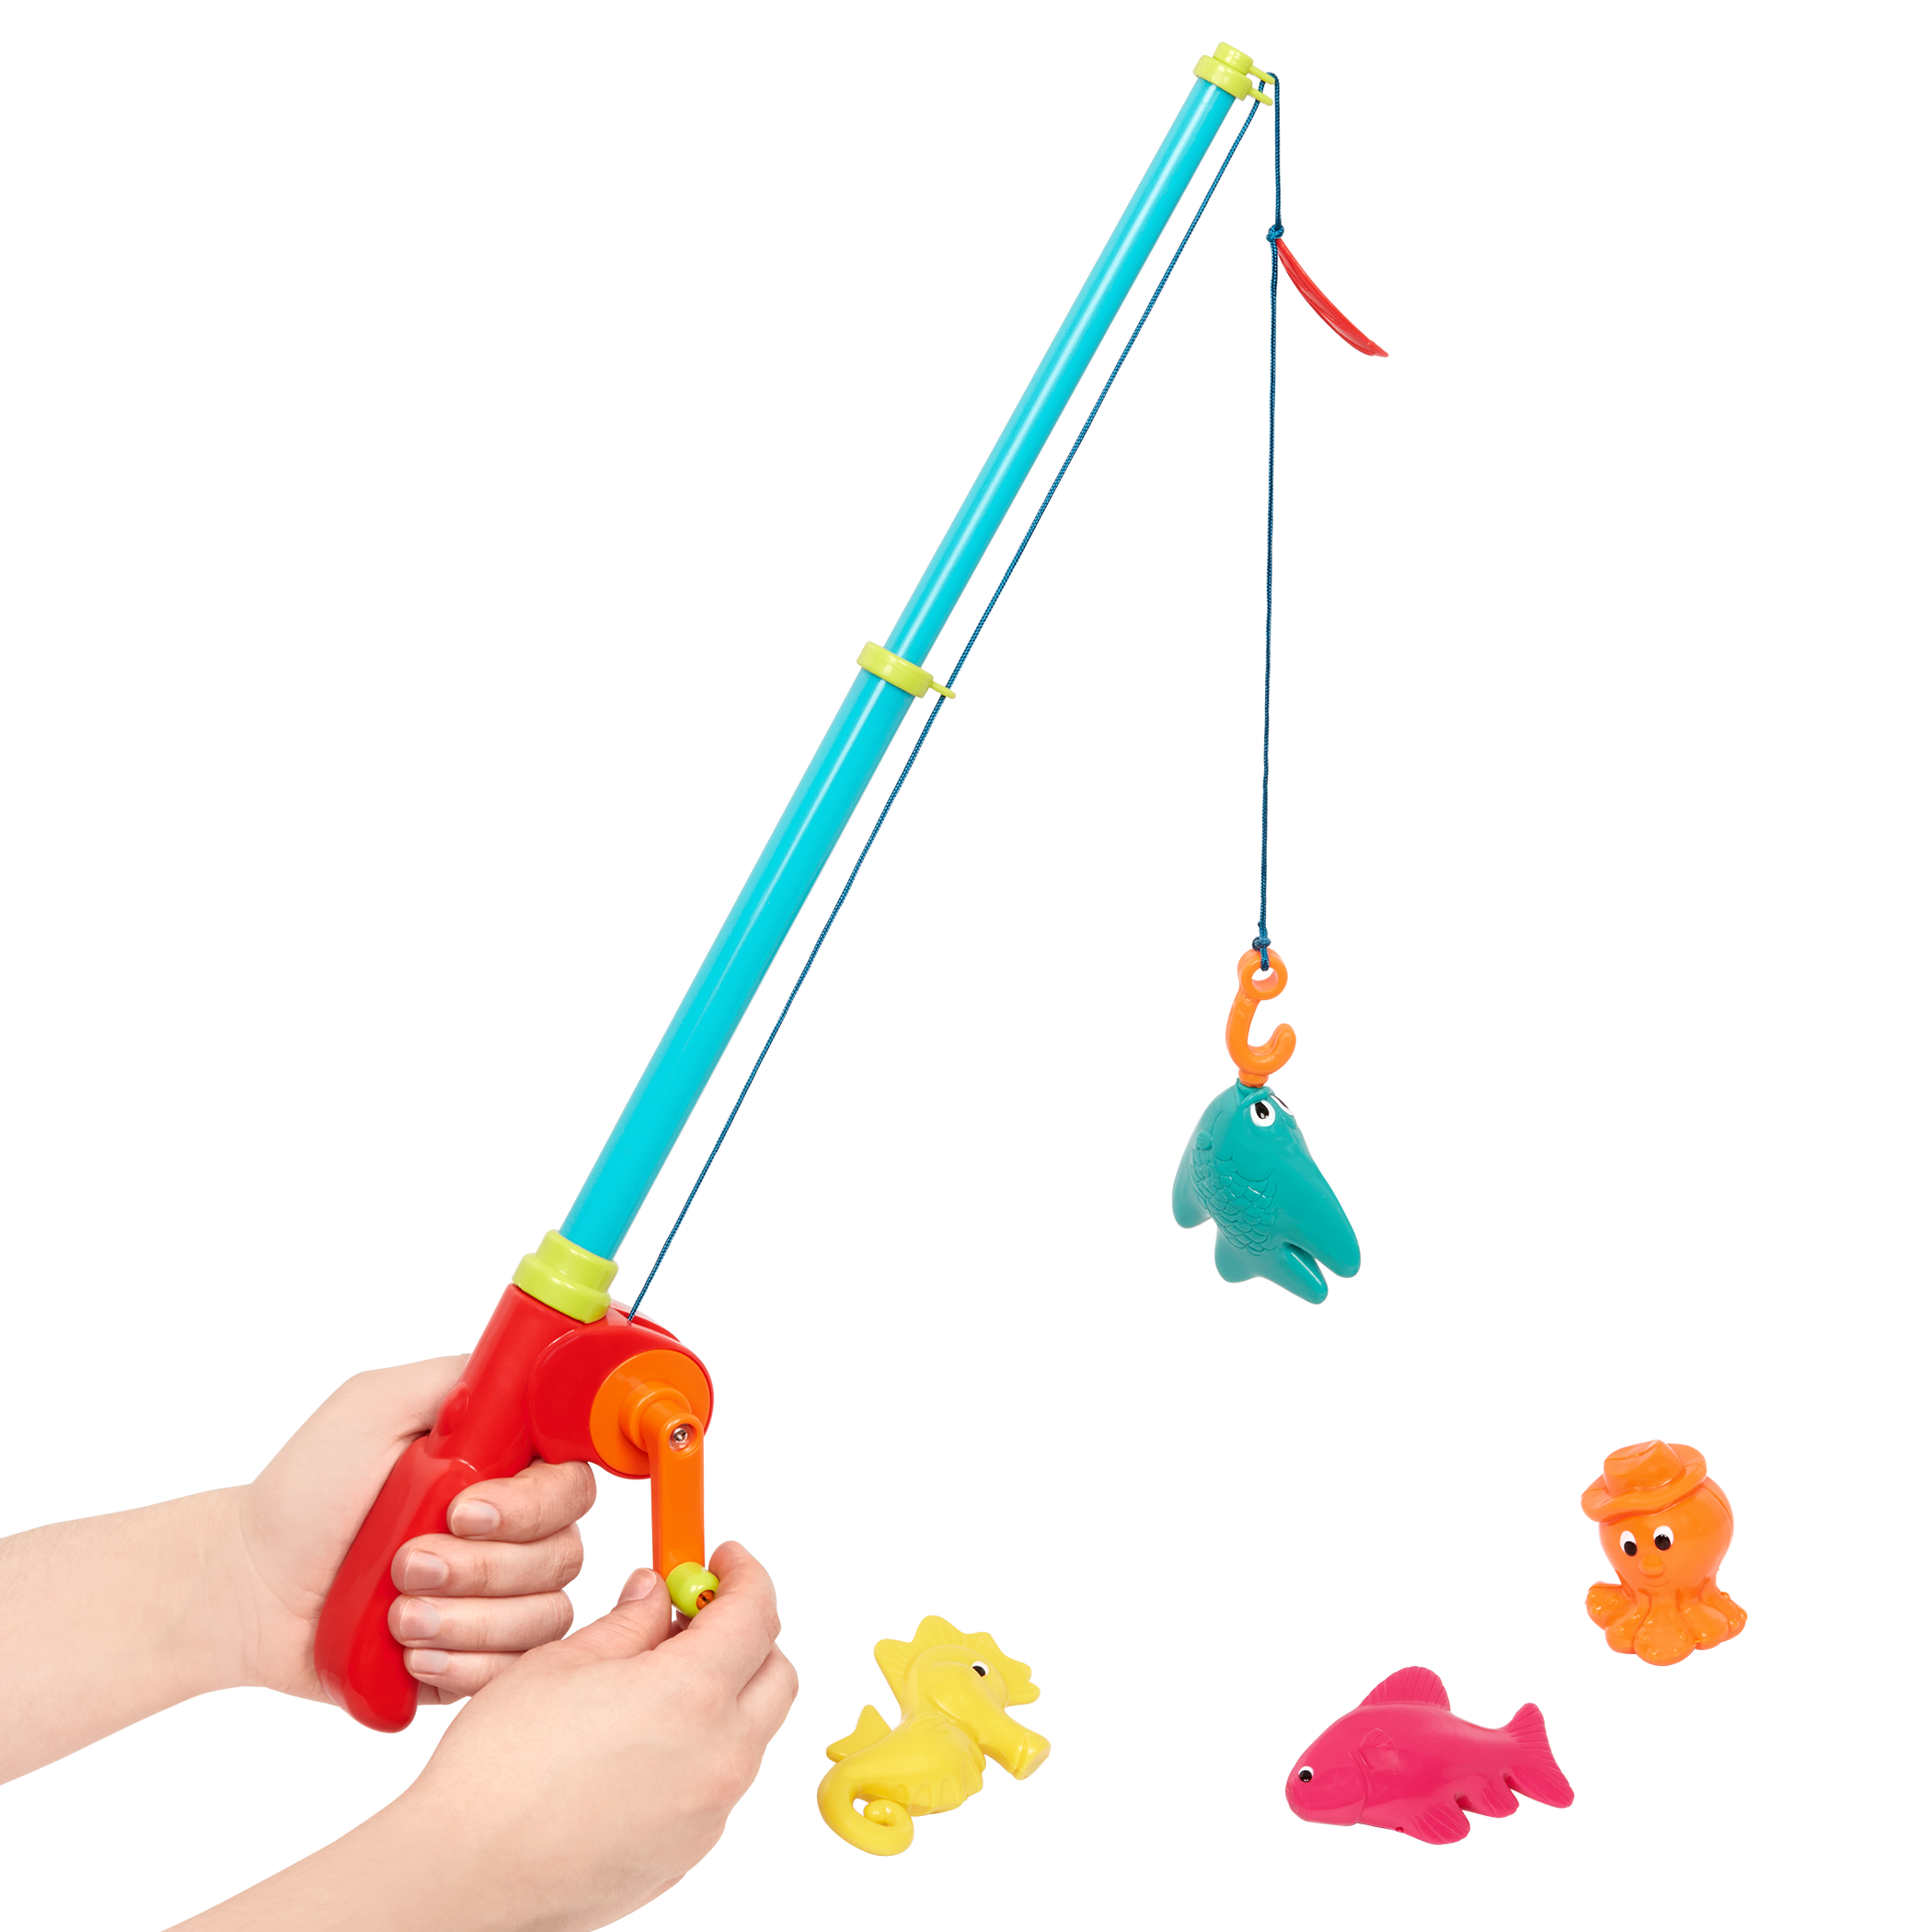 Magnetic Fishing Toy Set Magnetic Fish Toys Fishing Rod and 6 Cute Fishes Toys for Children Random Color